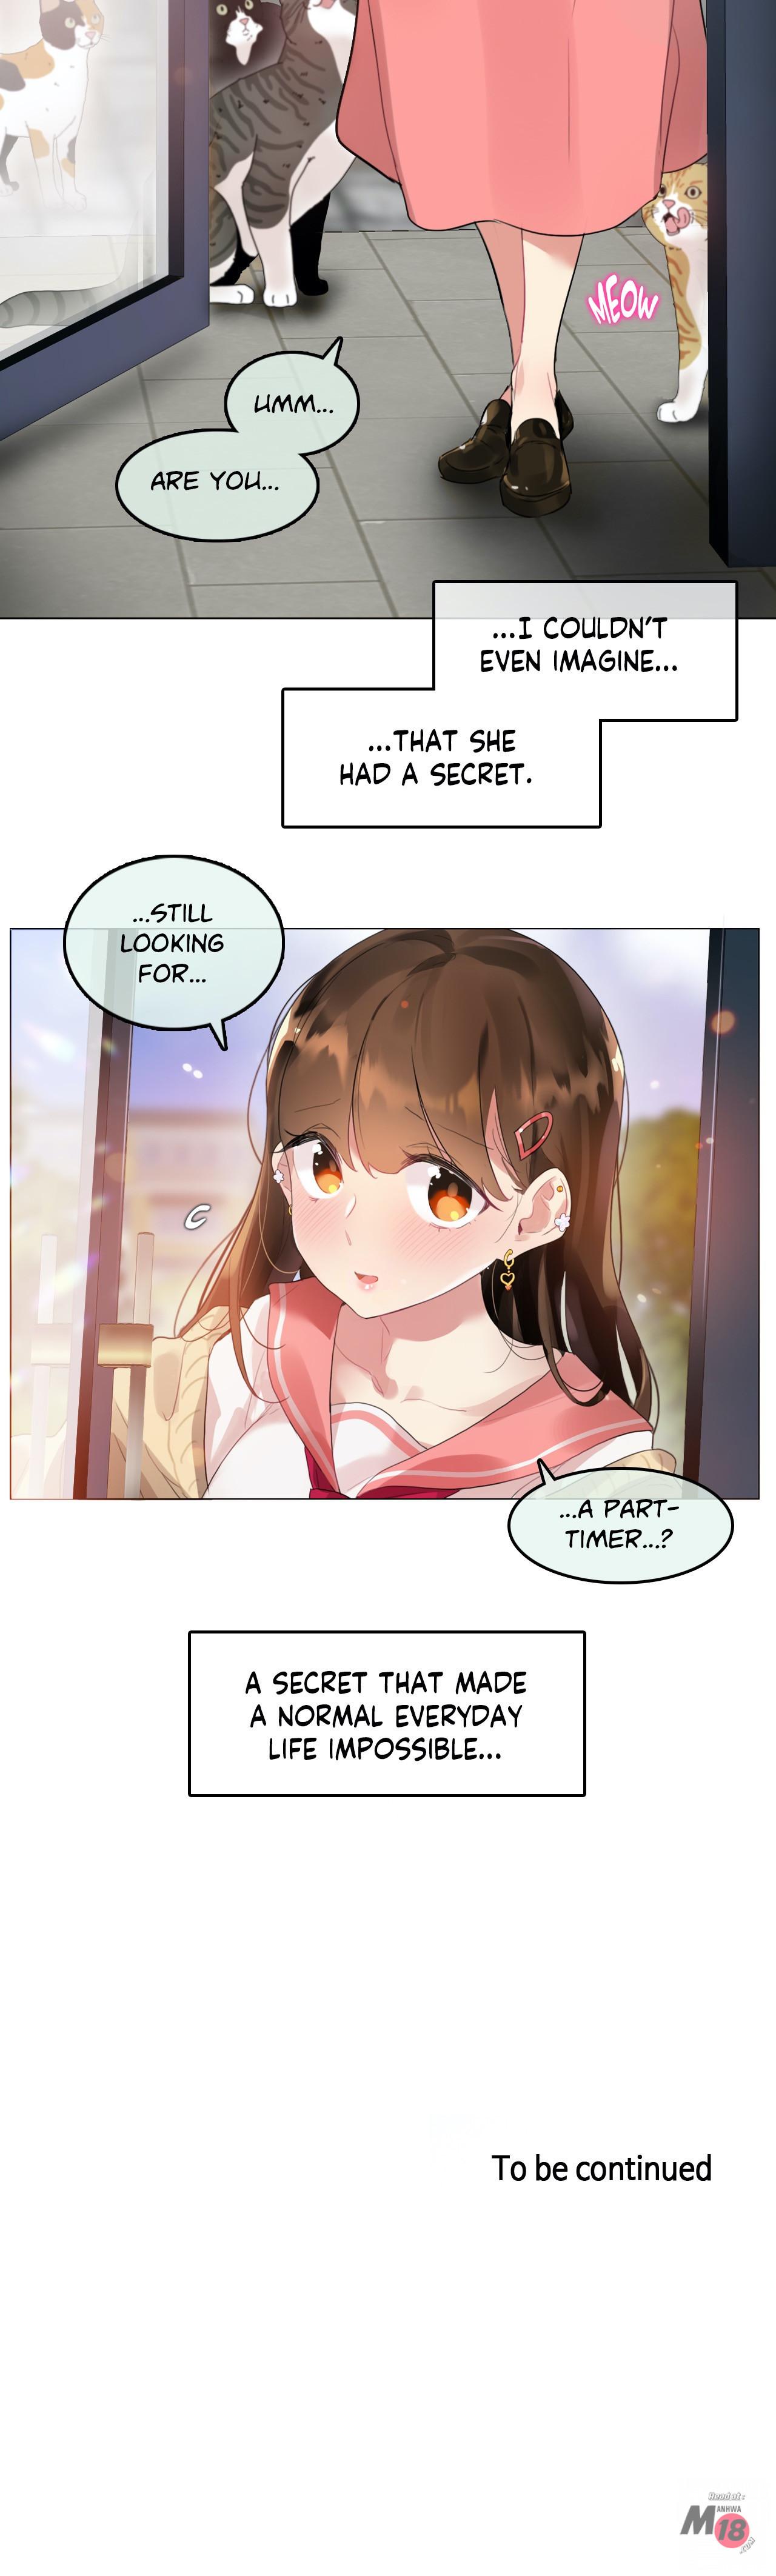 Perverts' Daily Lives Episode 1: Her Secret Recipe Ch1-19 22